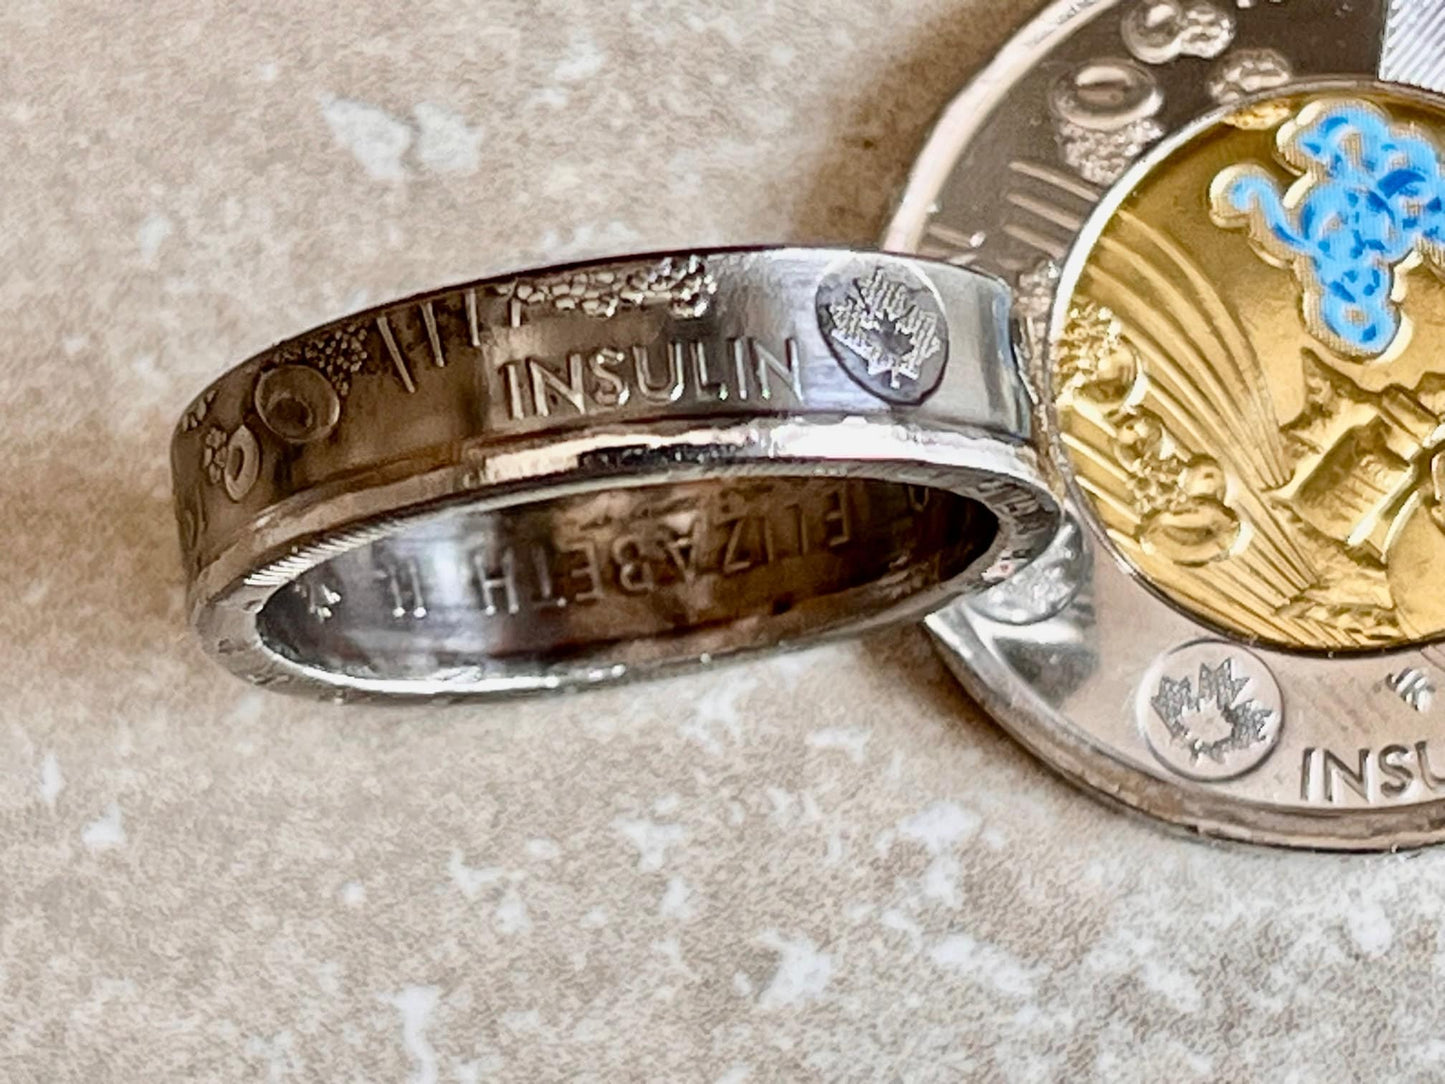 Insulin Canada Coin Ring 2021 Canadian 2 Dollar Handmade Personal Jewelry Ring Gift For Friend Ring Gift For Him Her World Coin Collector